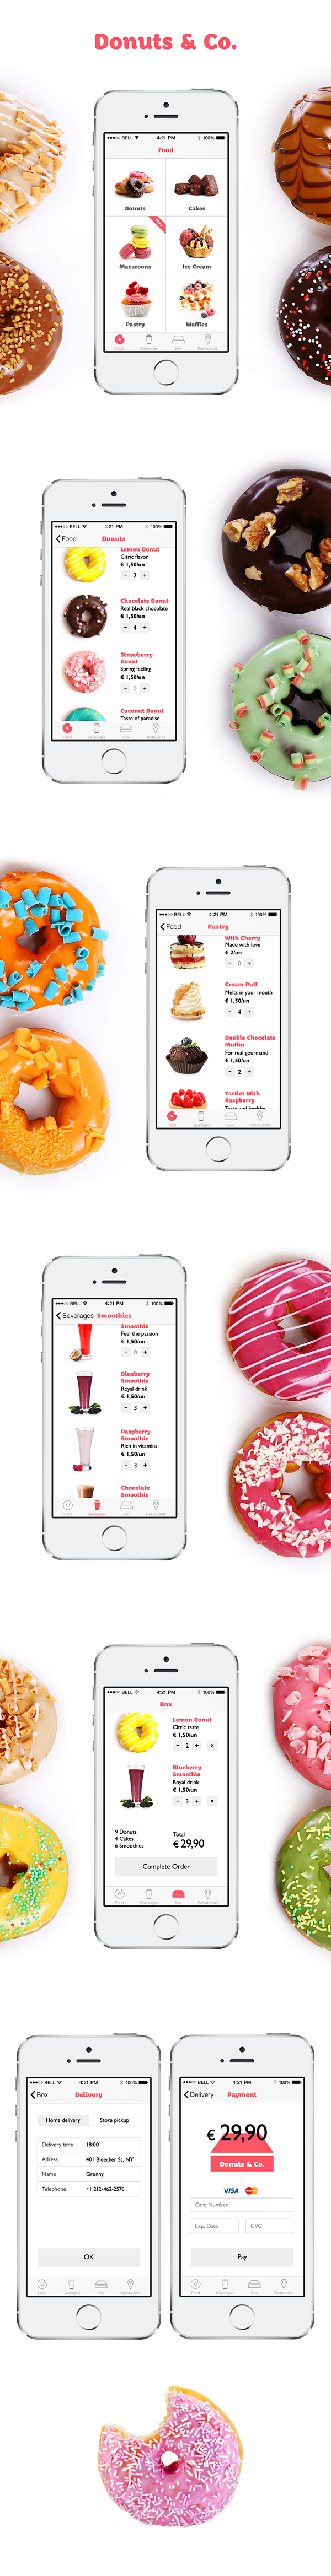 Donuts & Co. App : D...